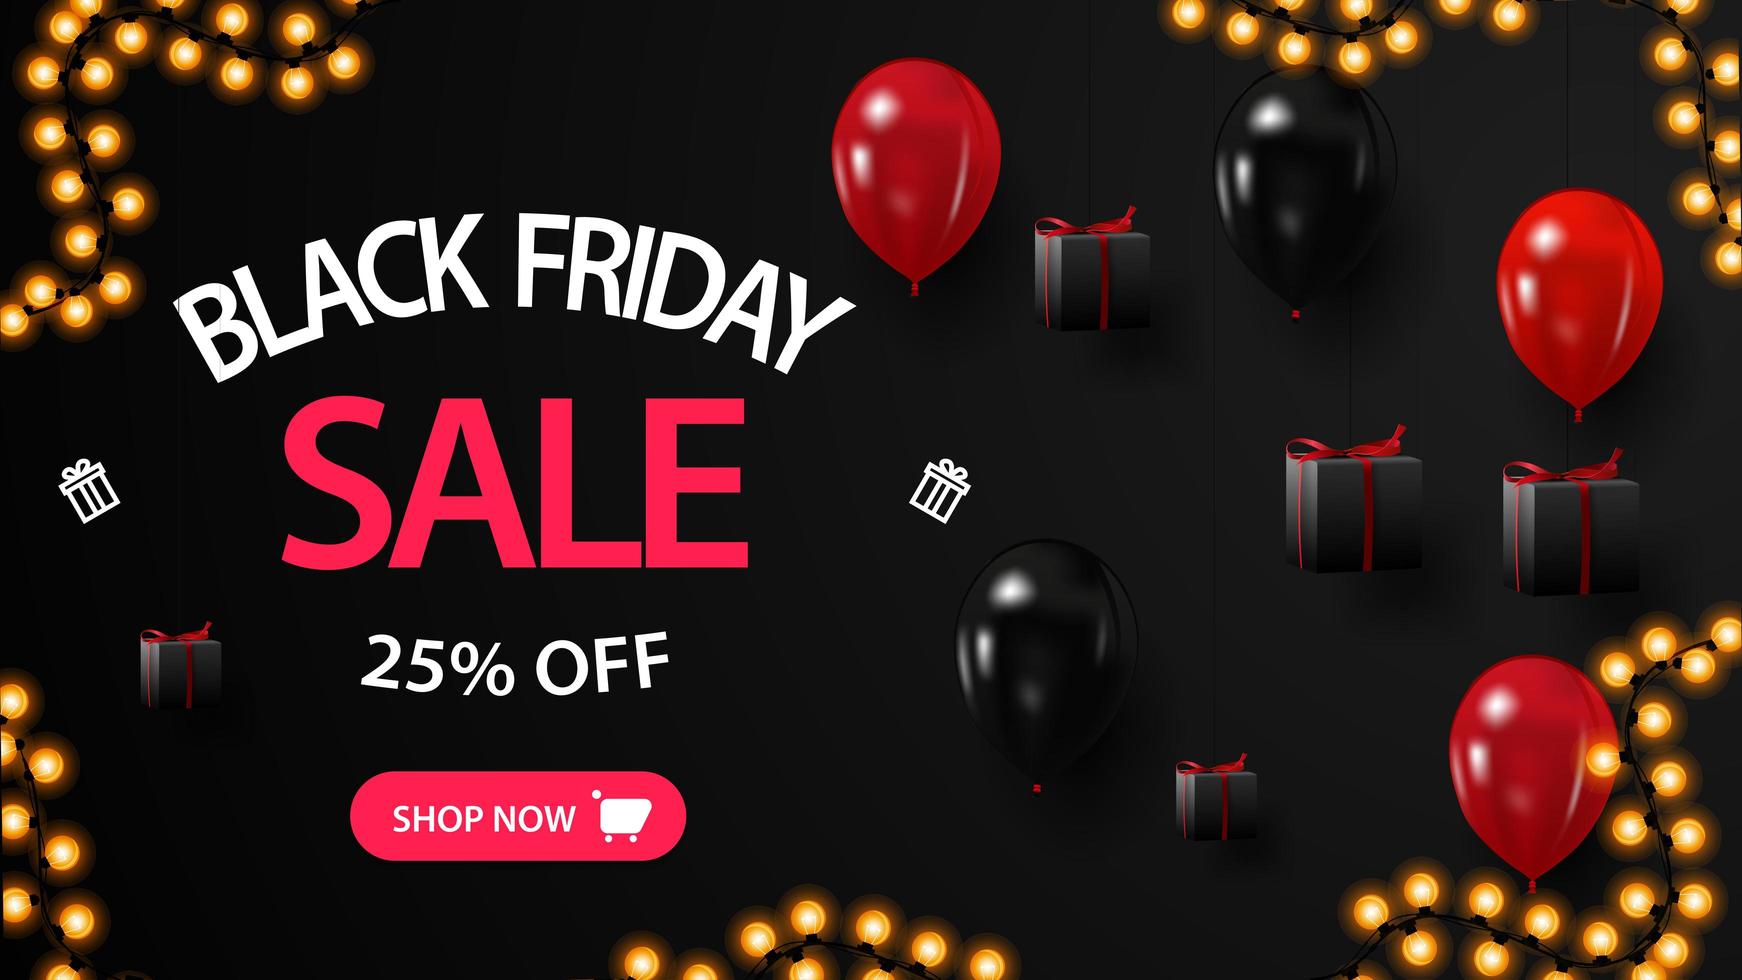 Black Friday sale, up to 25 off, creative black banner with gifts near a black wall and balloons vector